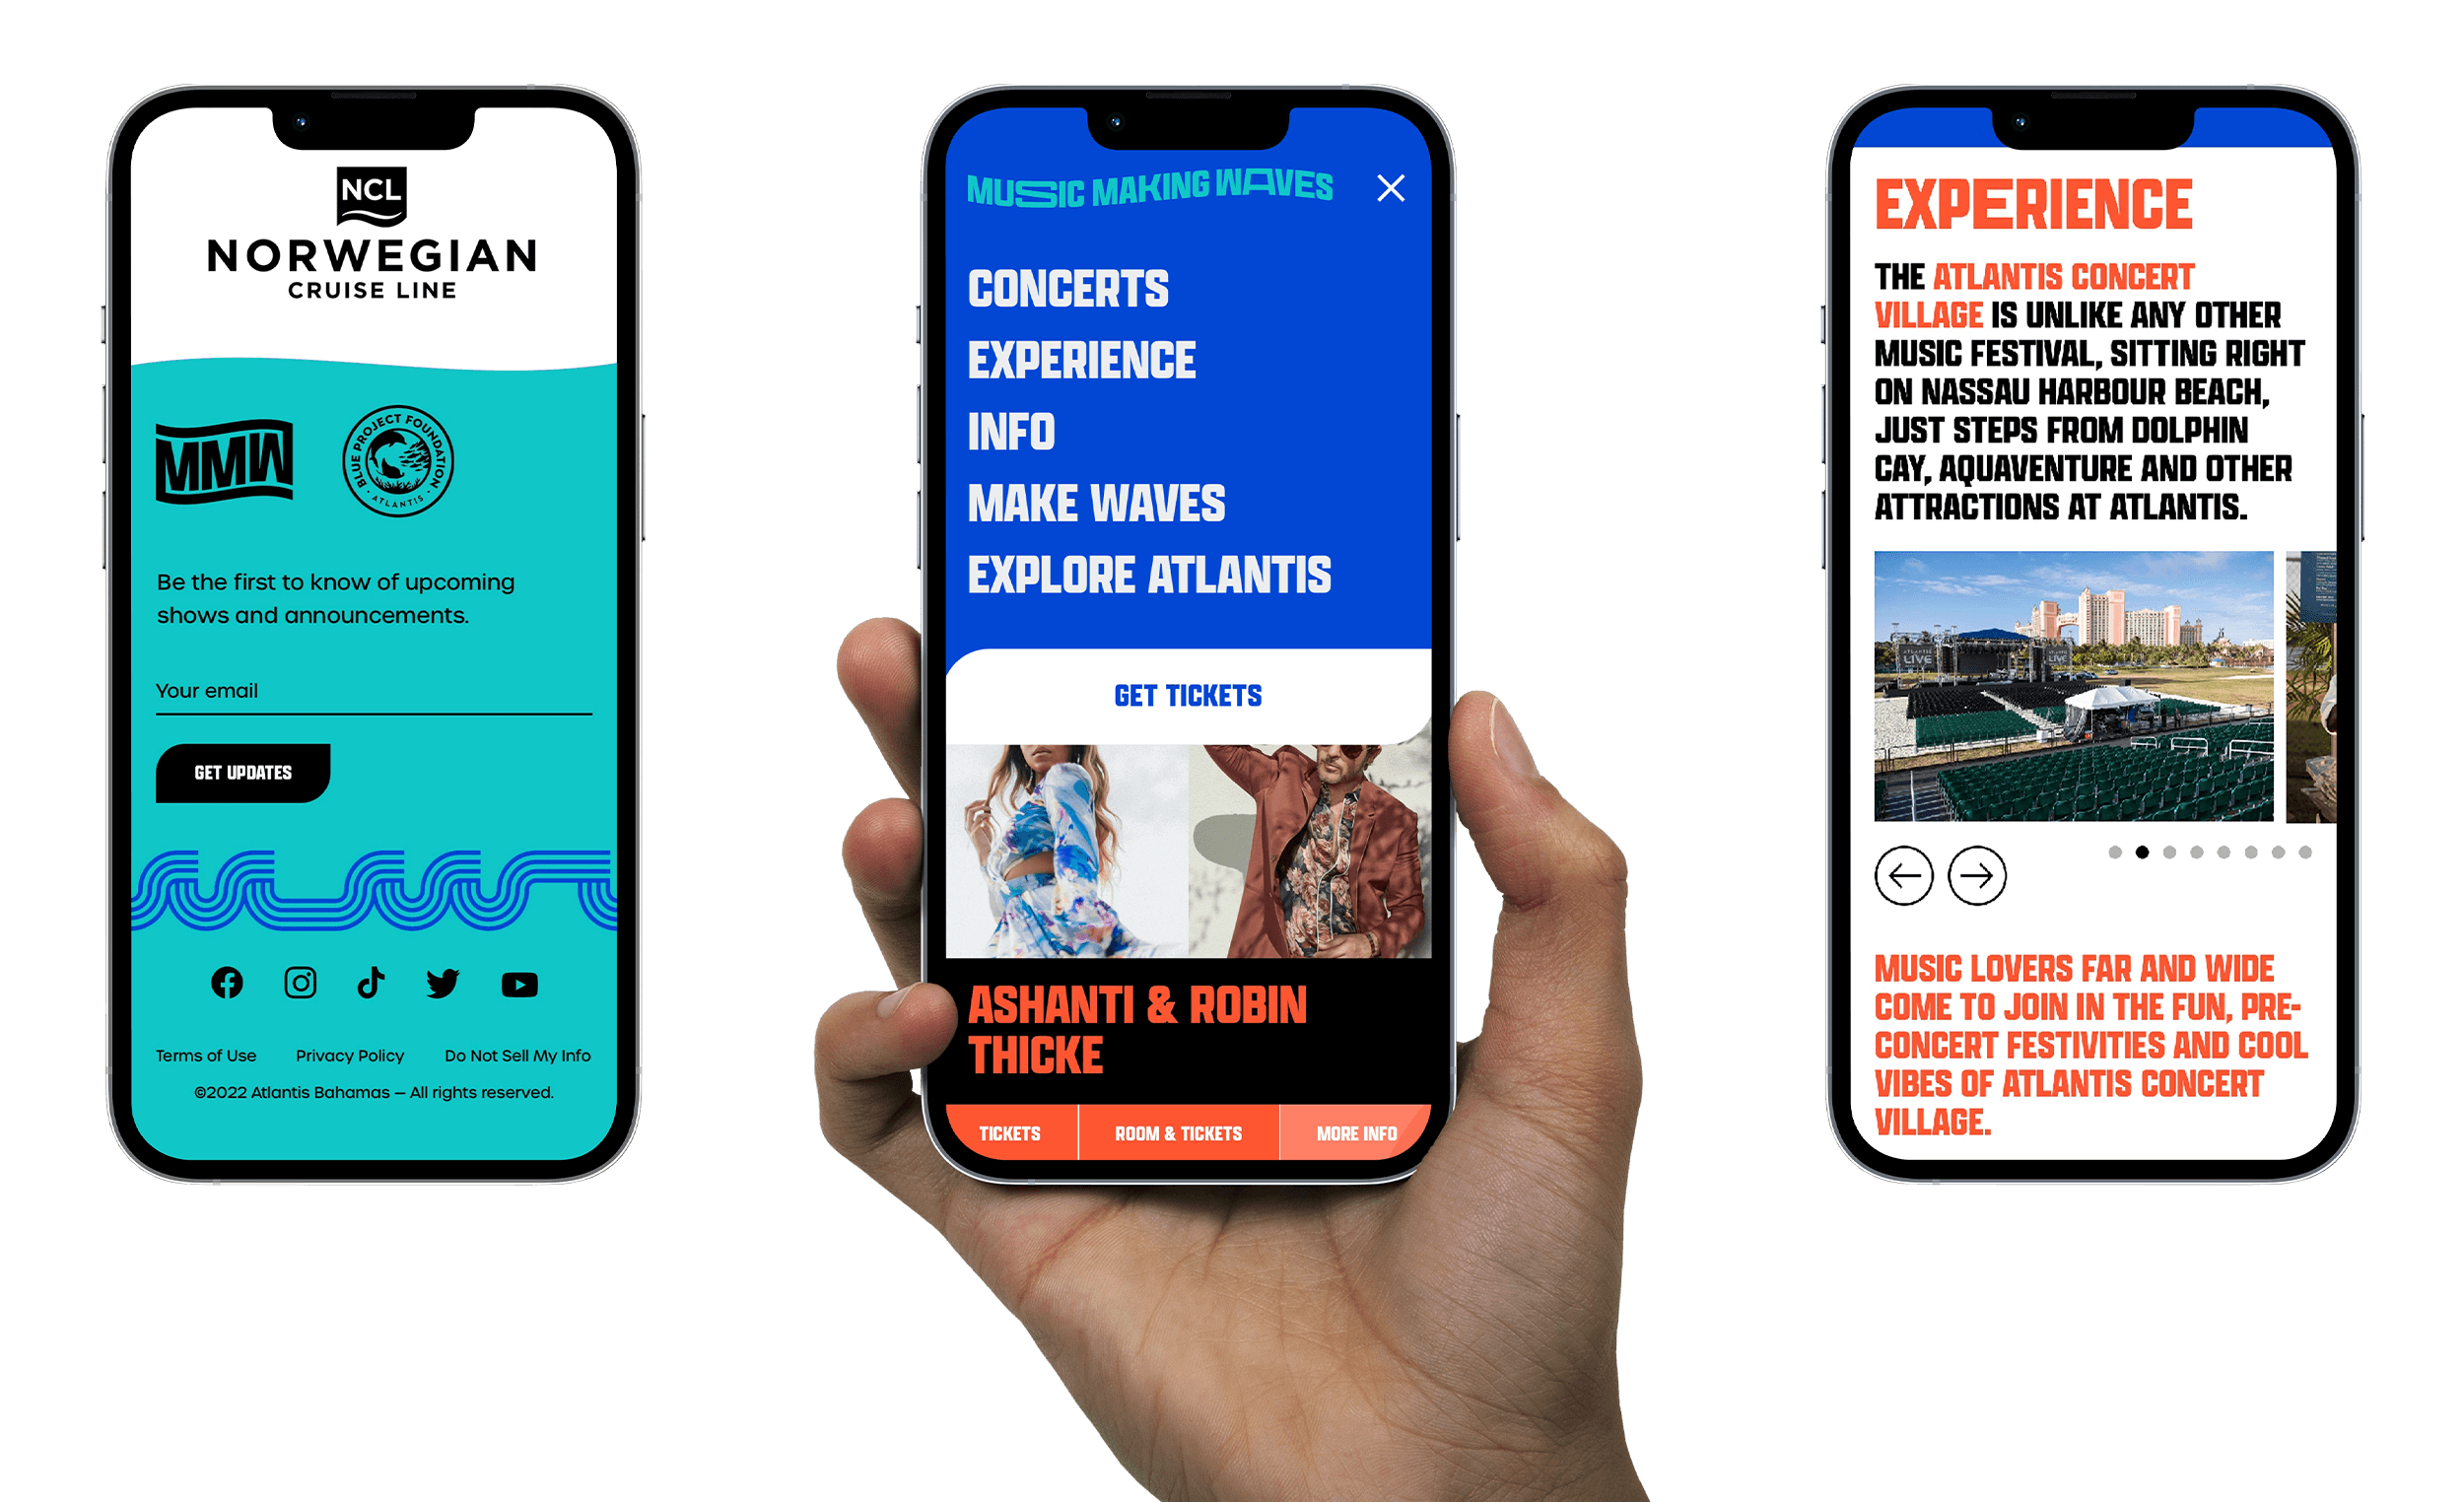 Mockup of 3 iphones with mobile website pages with a hand holding the center one, pages being shown from left to right are Home Page Footer, Concert Page with Mobile Nav, and Experience Page